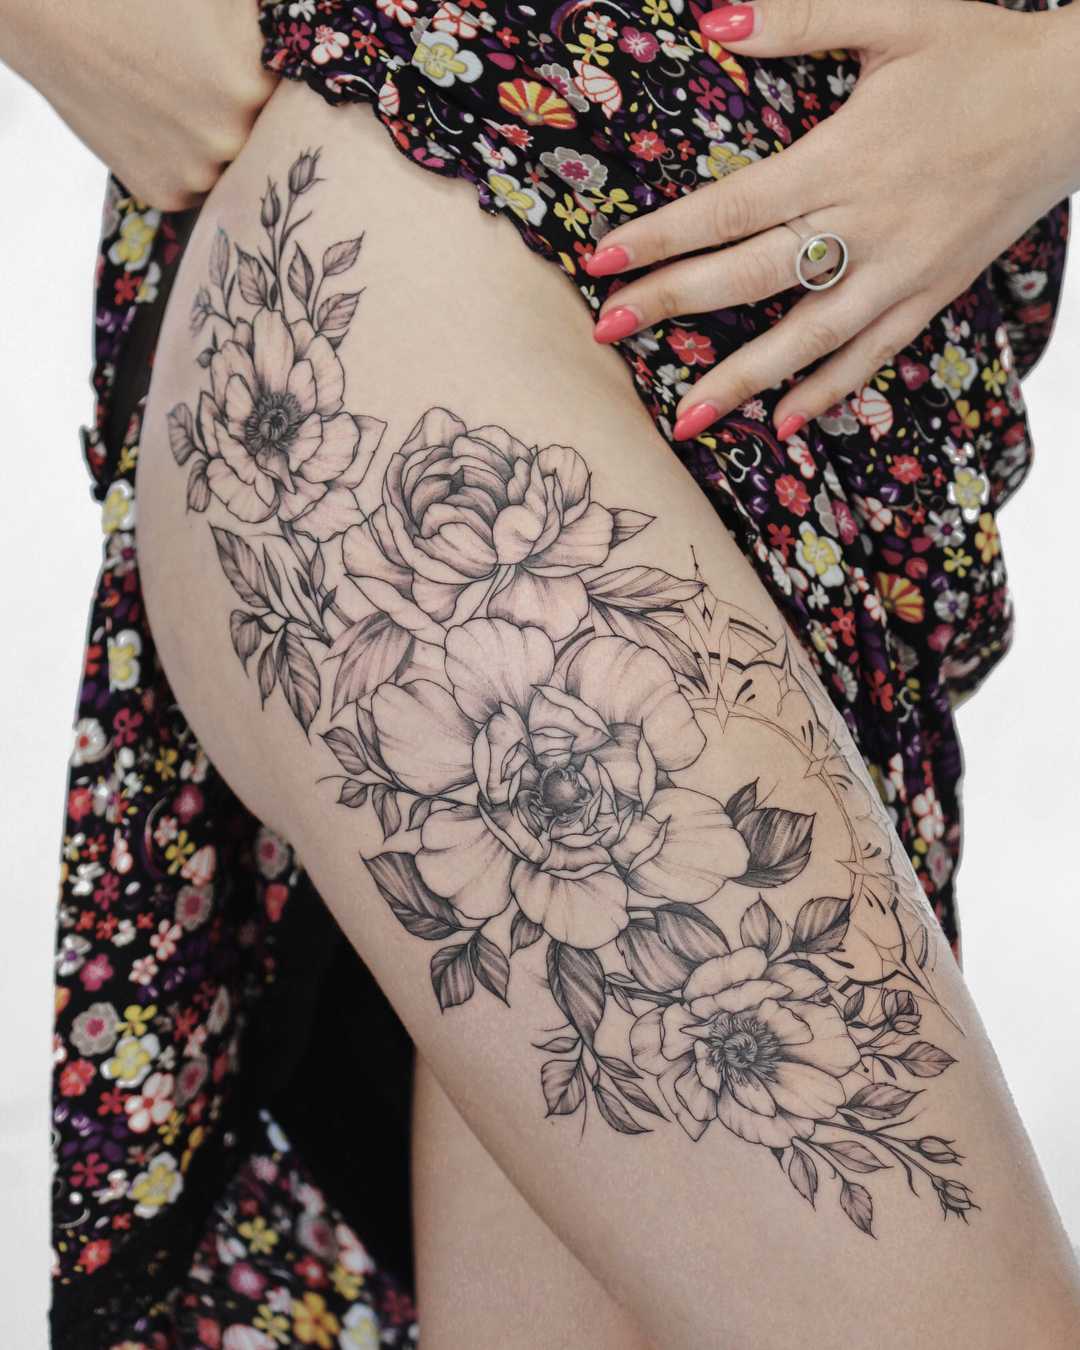 Gorgeous floral tattoo on the thigh